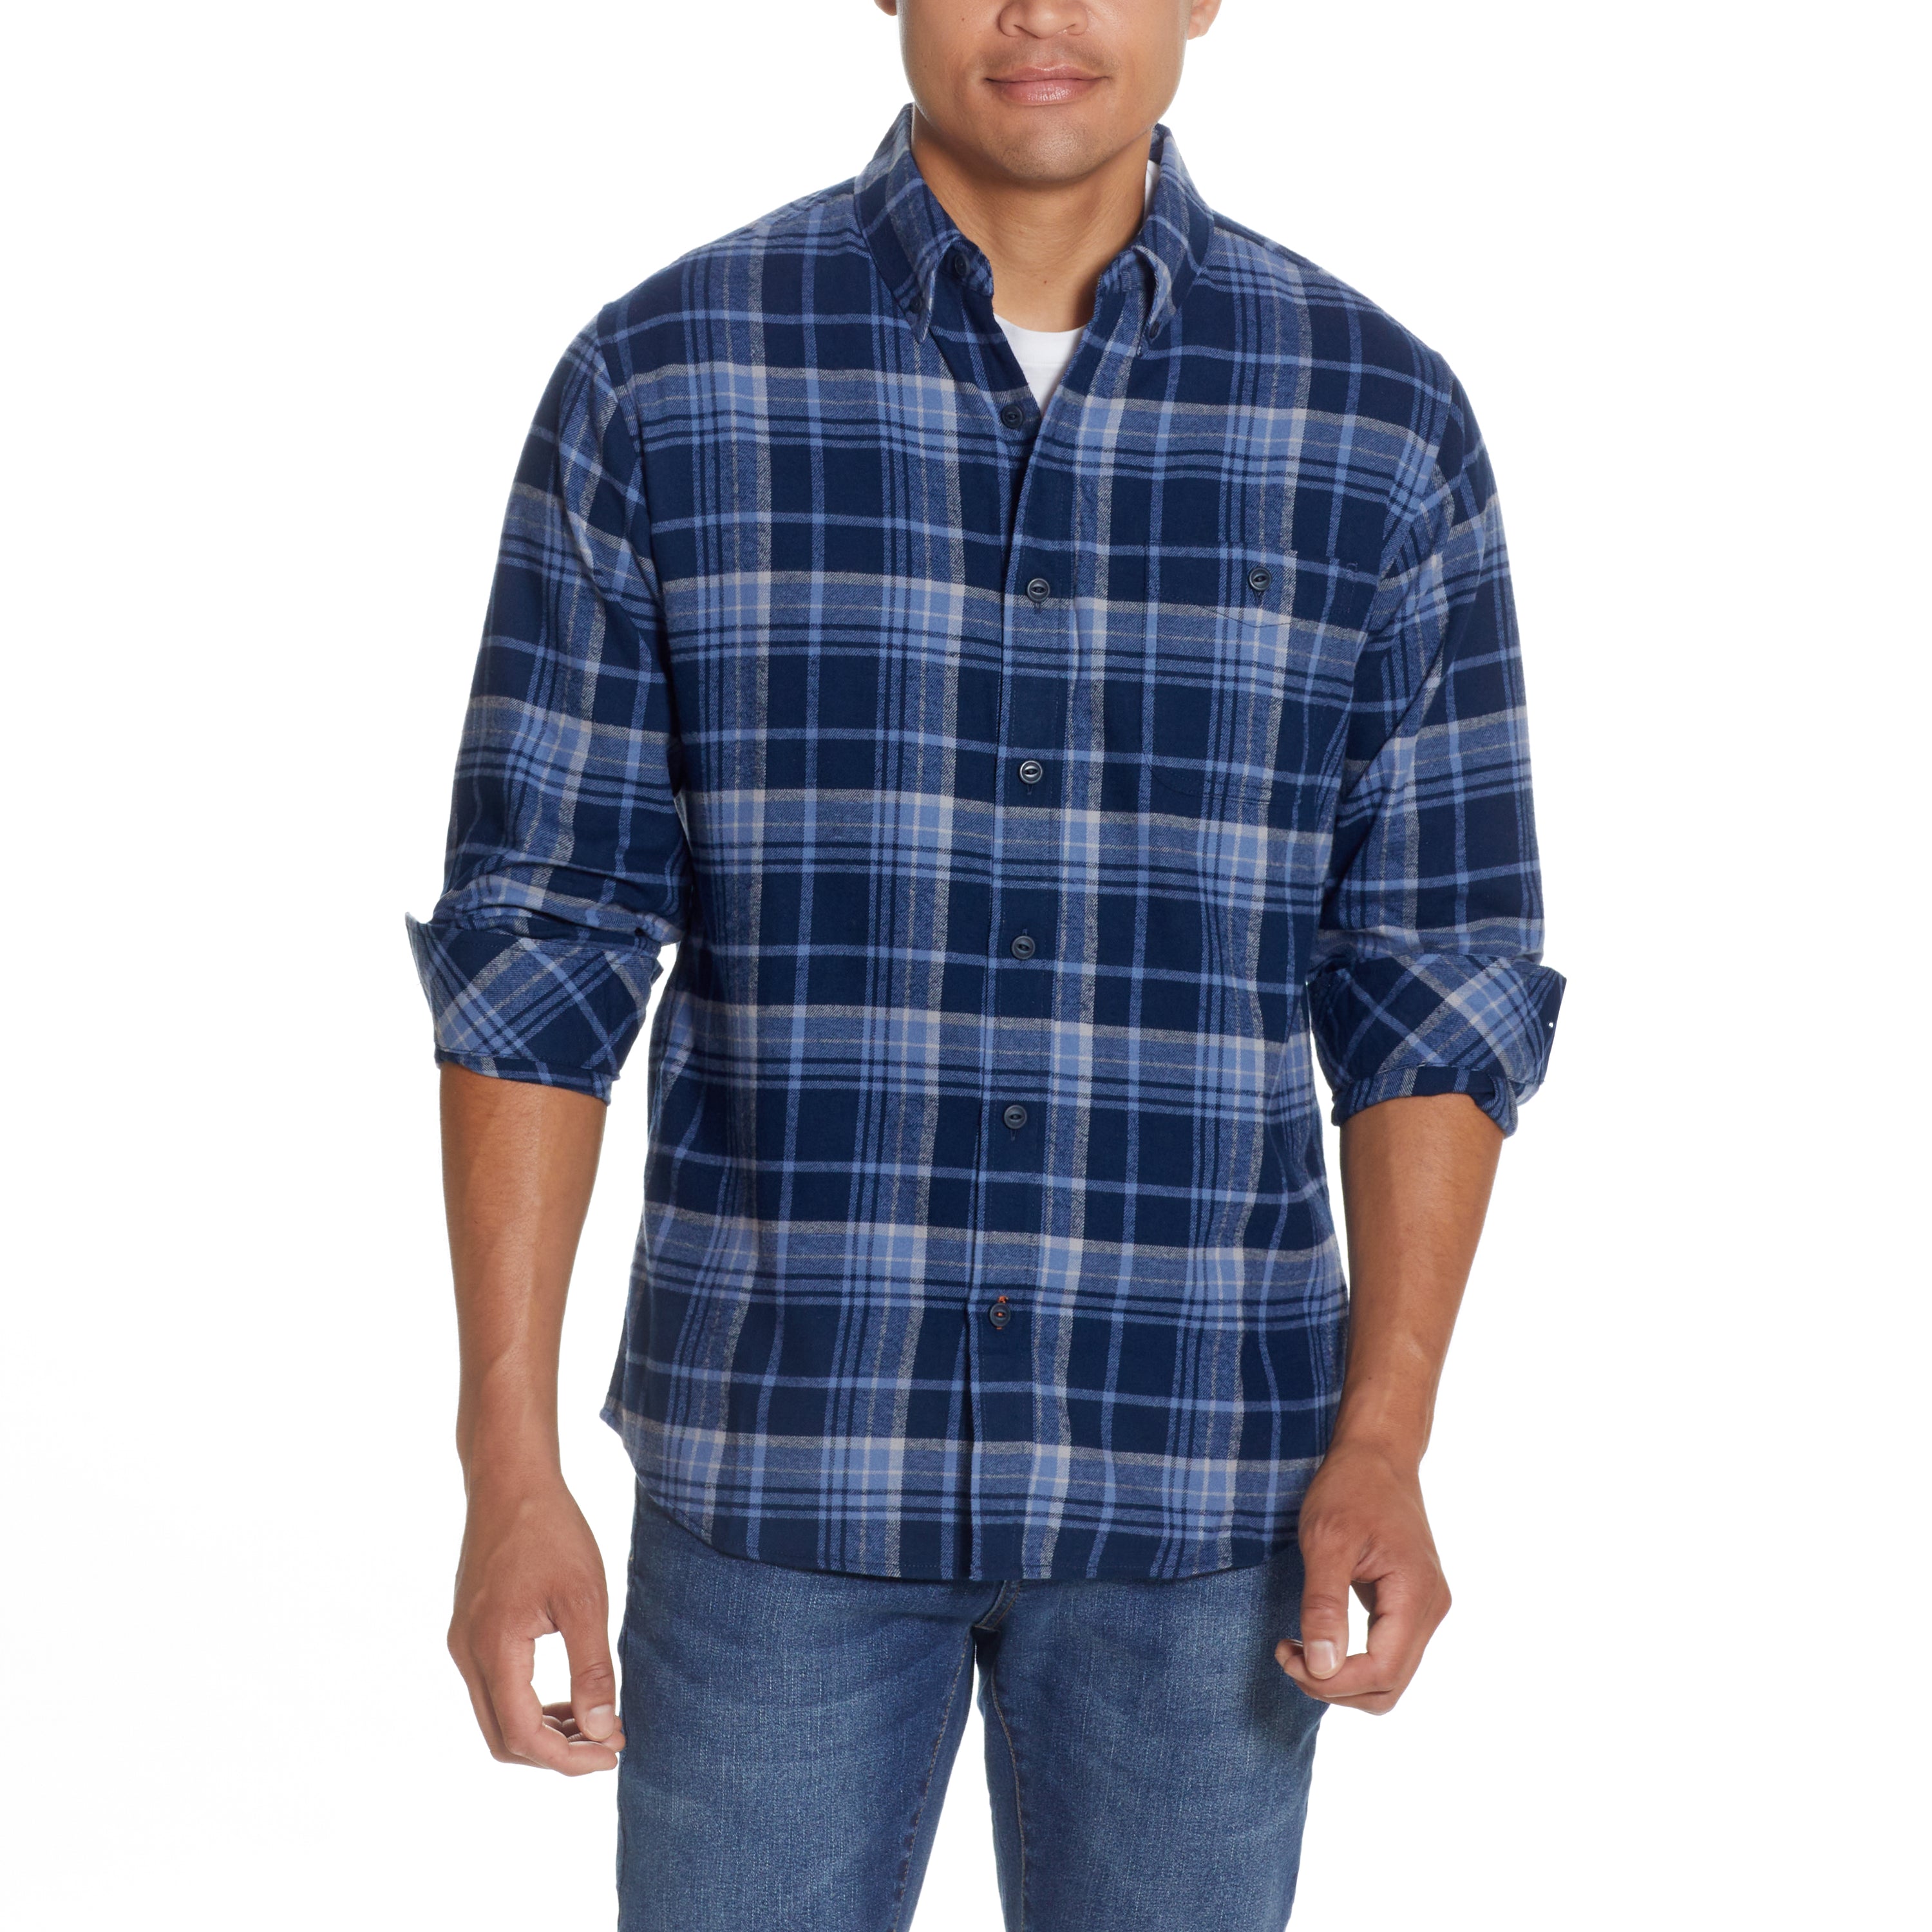 ANTIQUE FLANNEL SHIRT in MARITIME BLUE